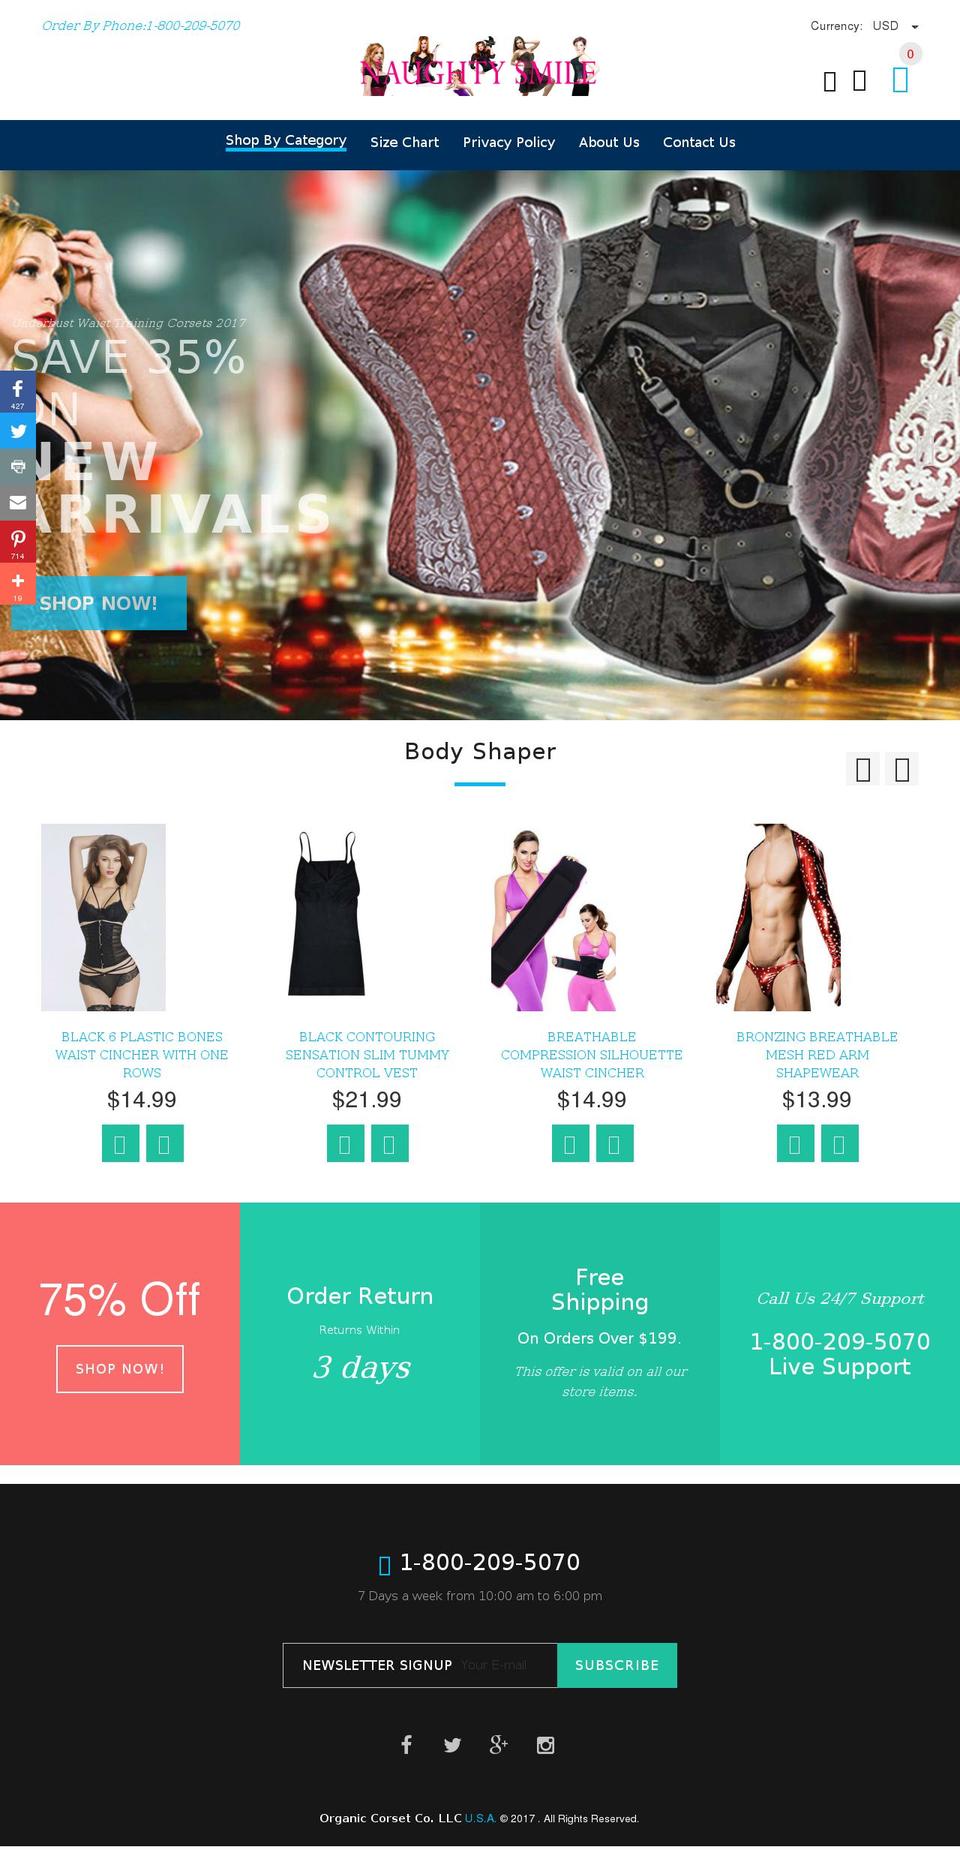 yourstore-v1-4-8 Shopify theme site example waistreducingcorset.net